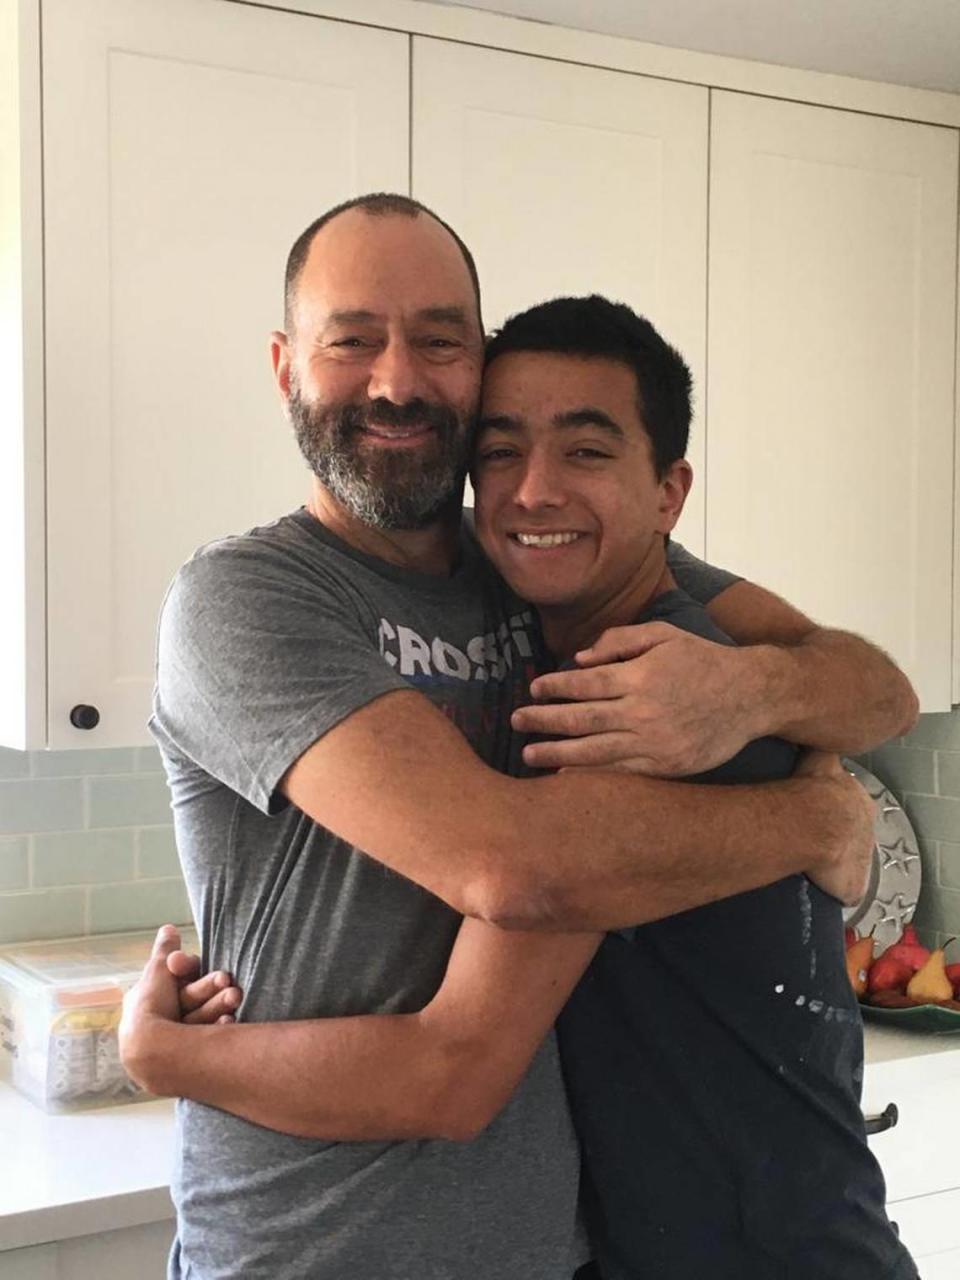 Hersh Goldberg-Polin, an American citizen kidnapped by Hamas, embraces his father, Jonathan Polin.